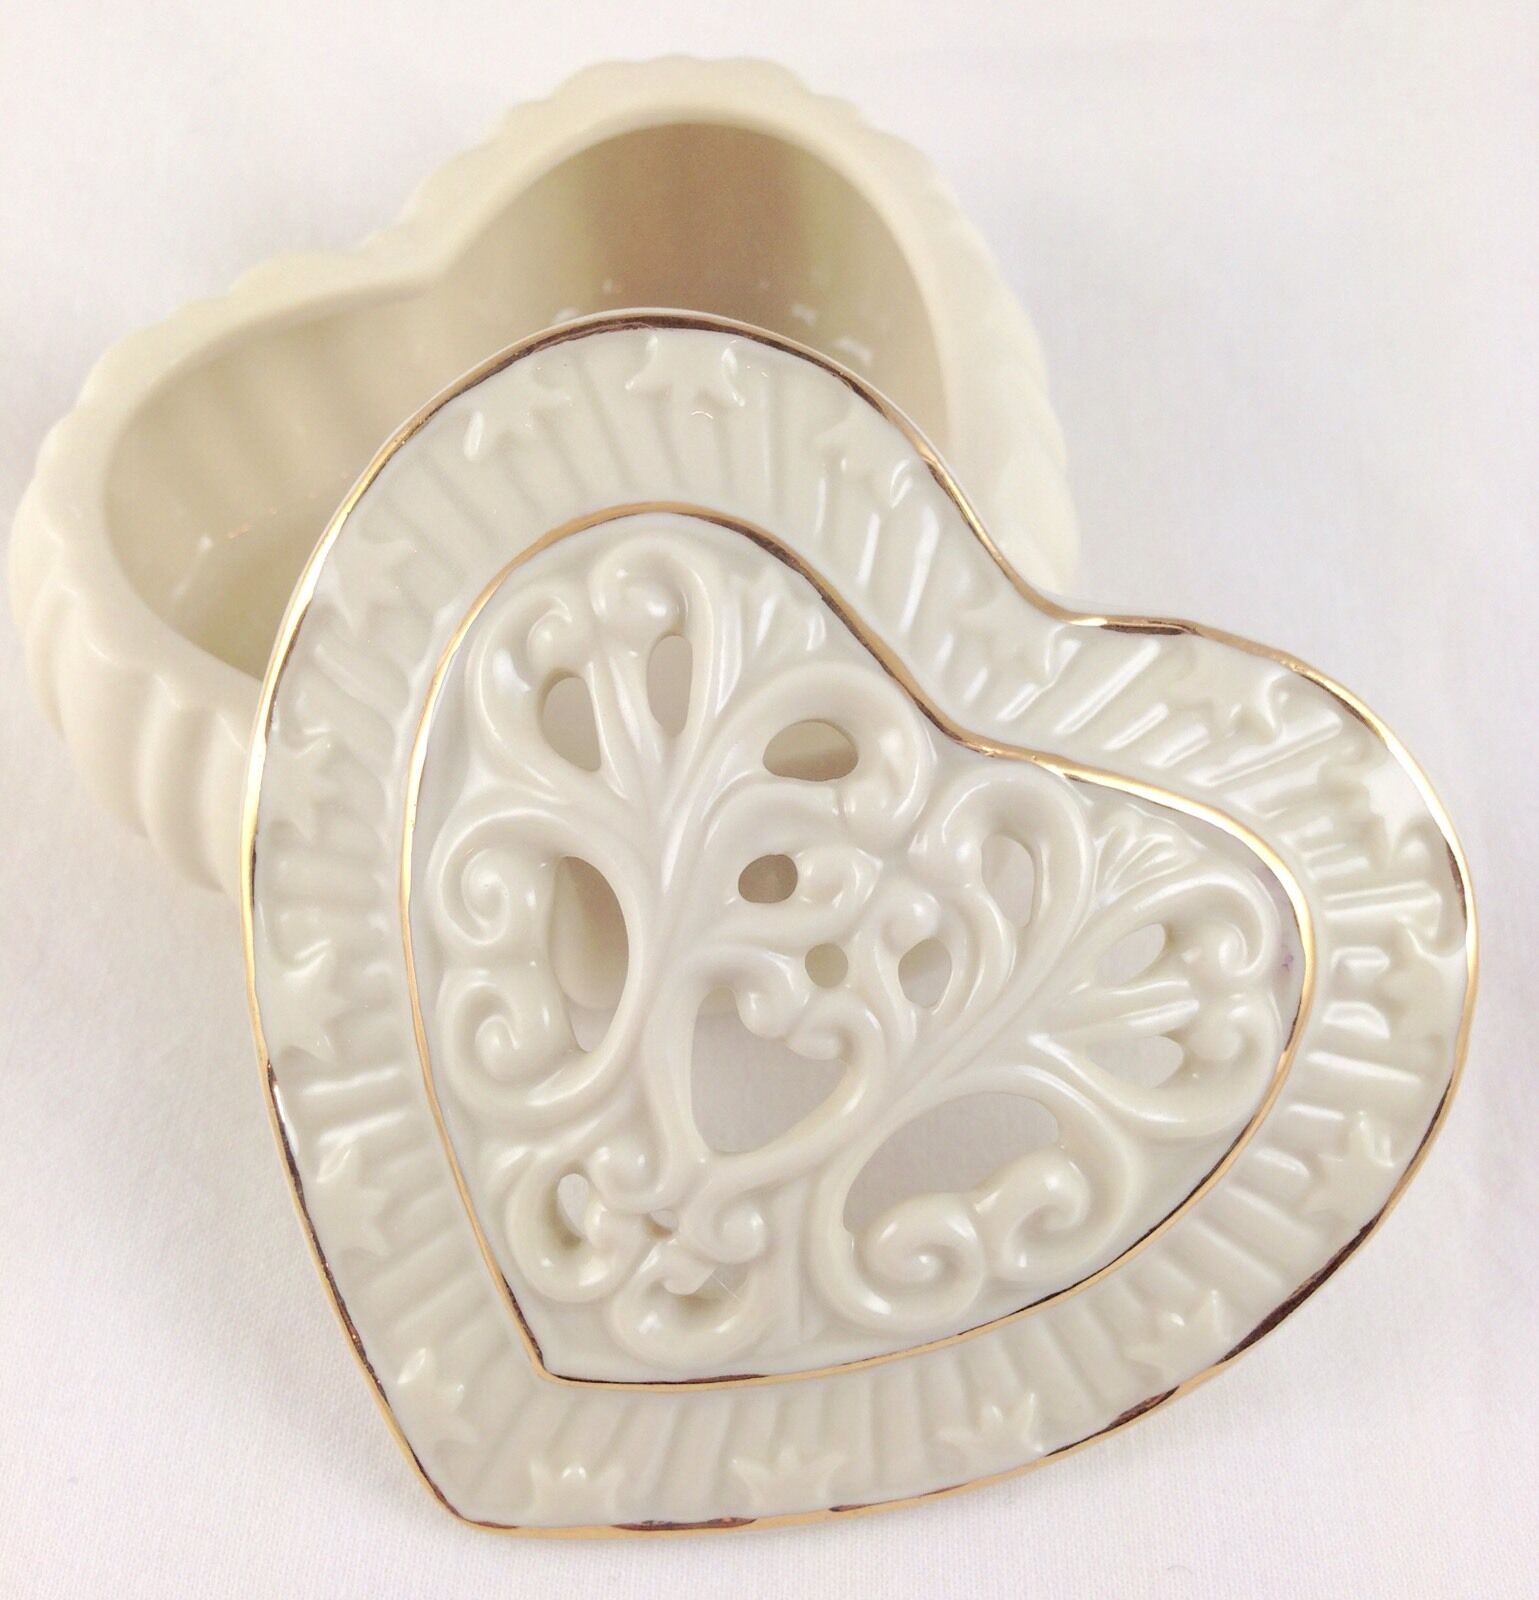 Lenox China Filigree Heart Box Wedding Favors - Sold As a LOT of 30 - New In Box